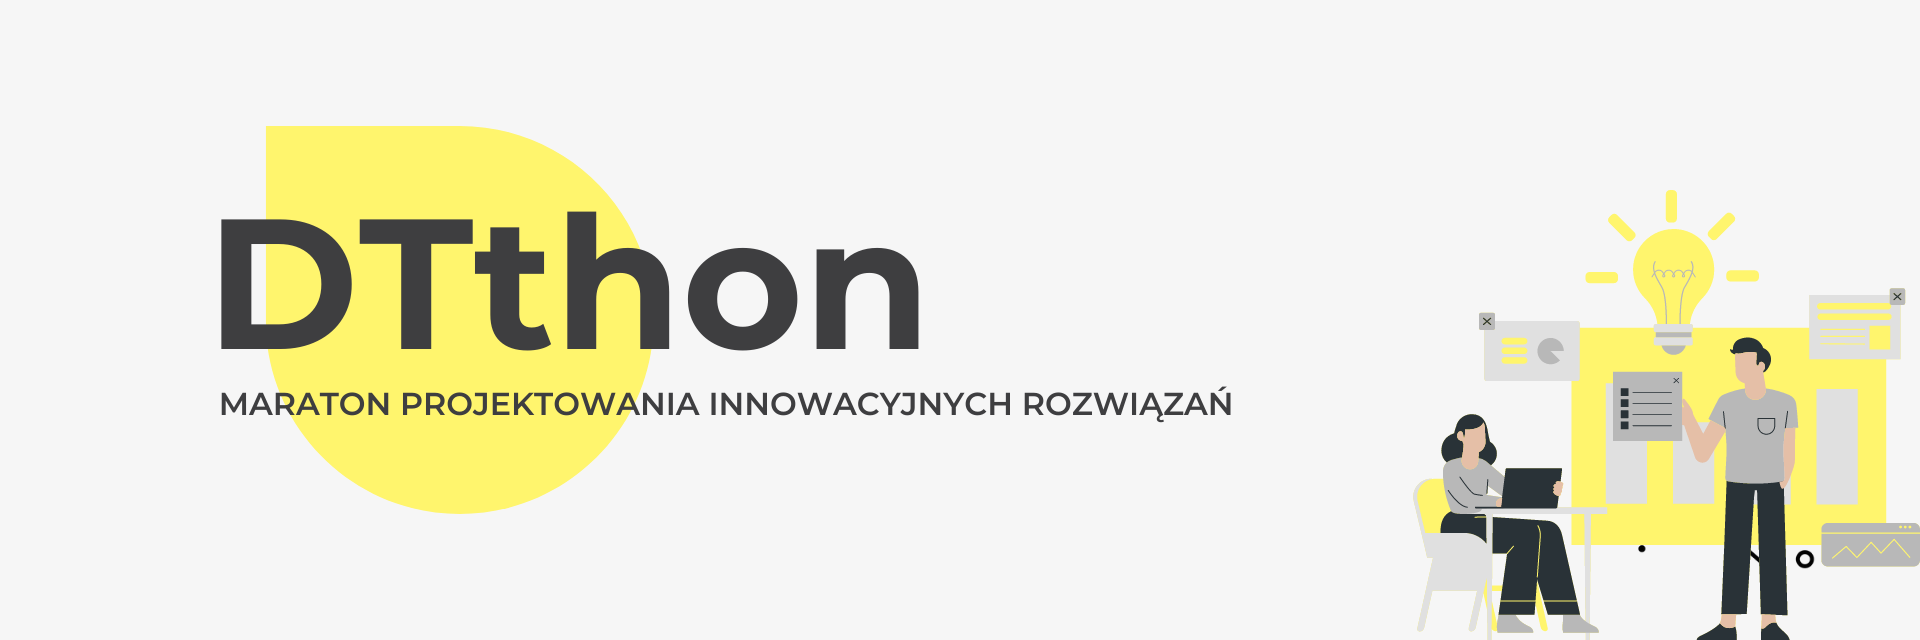 dtthon_by_dt_hub_uew